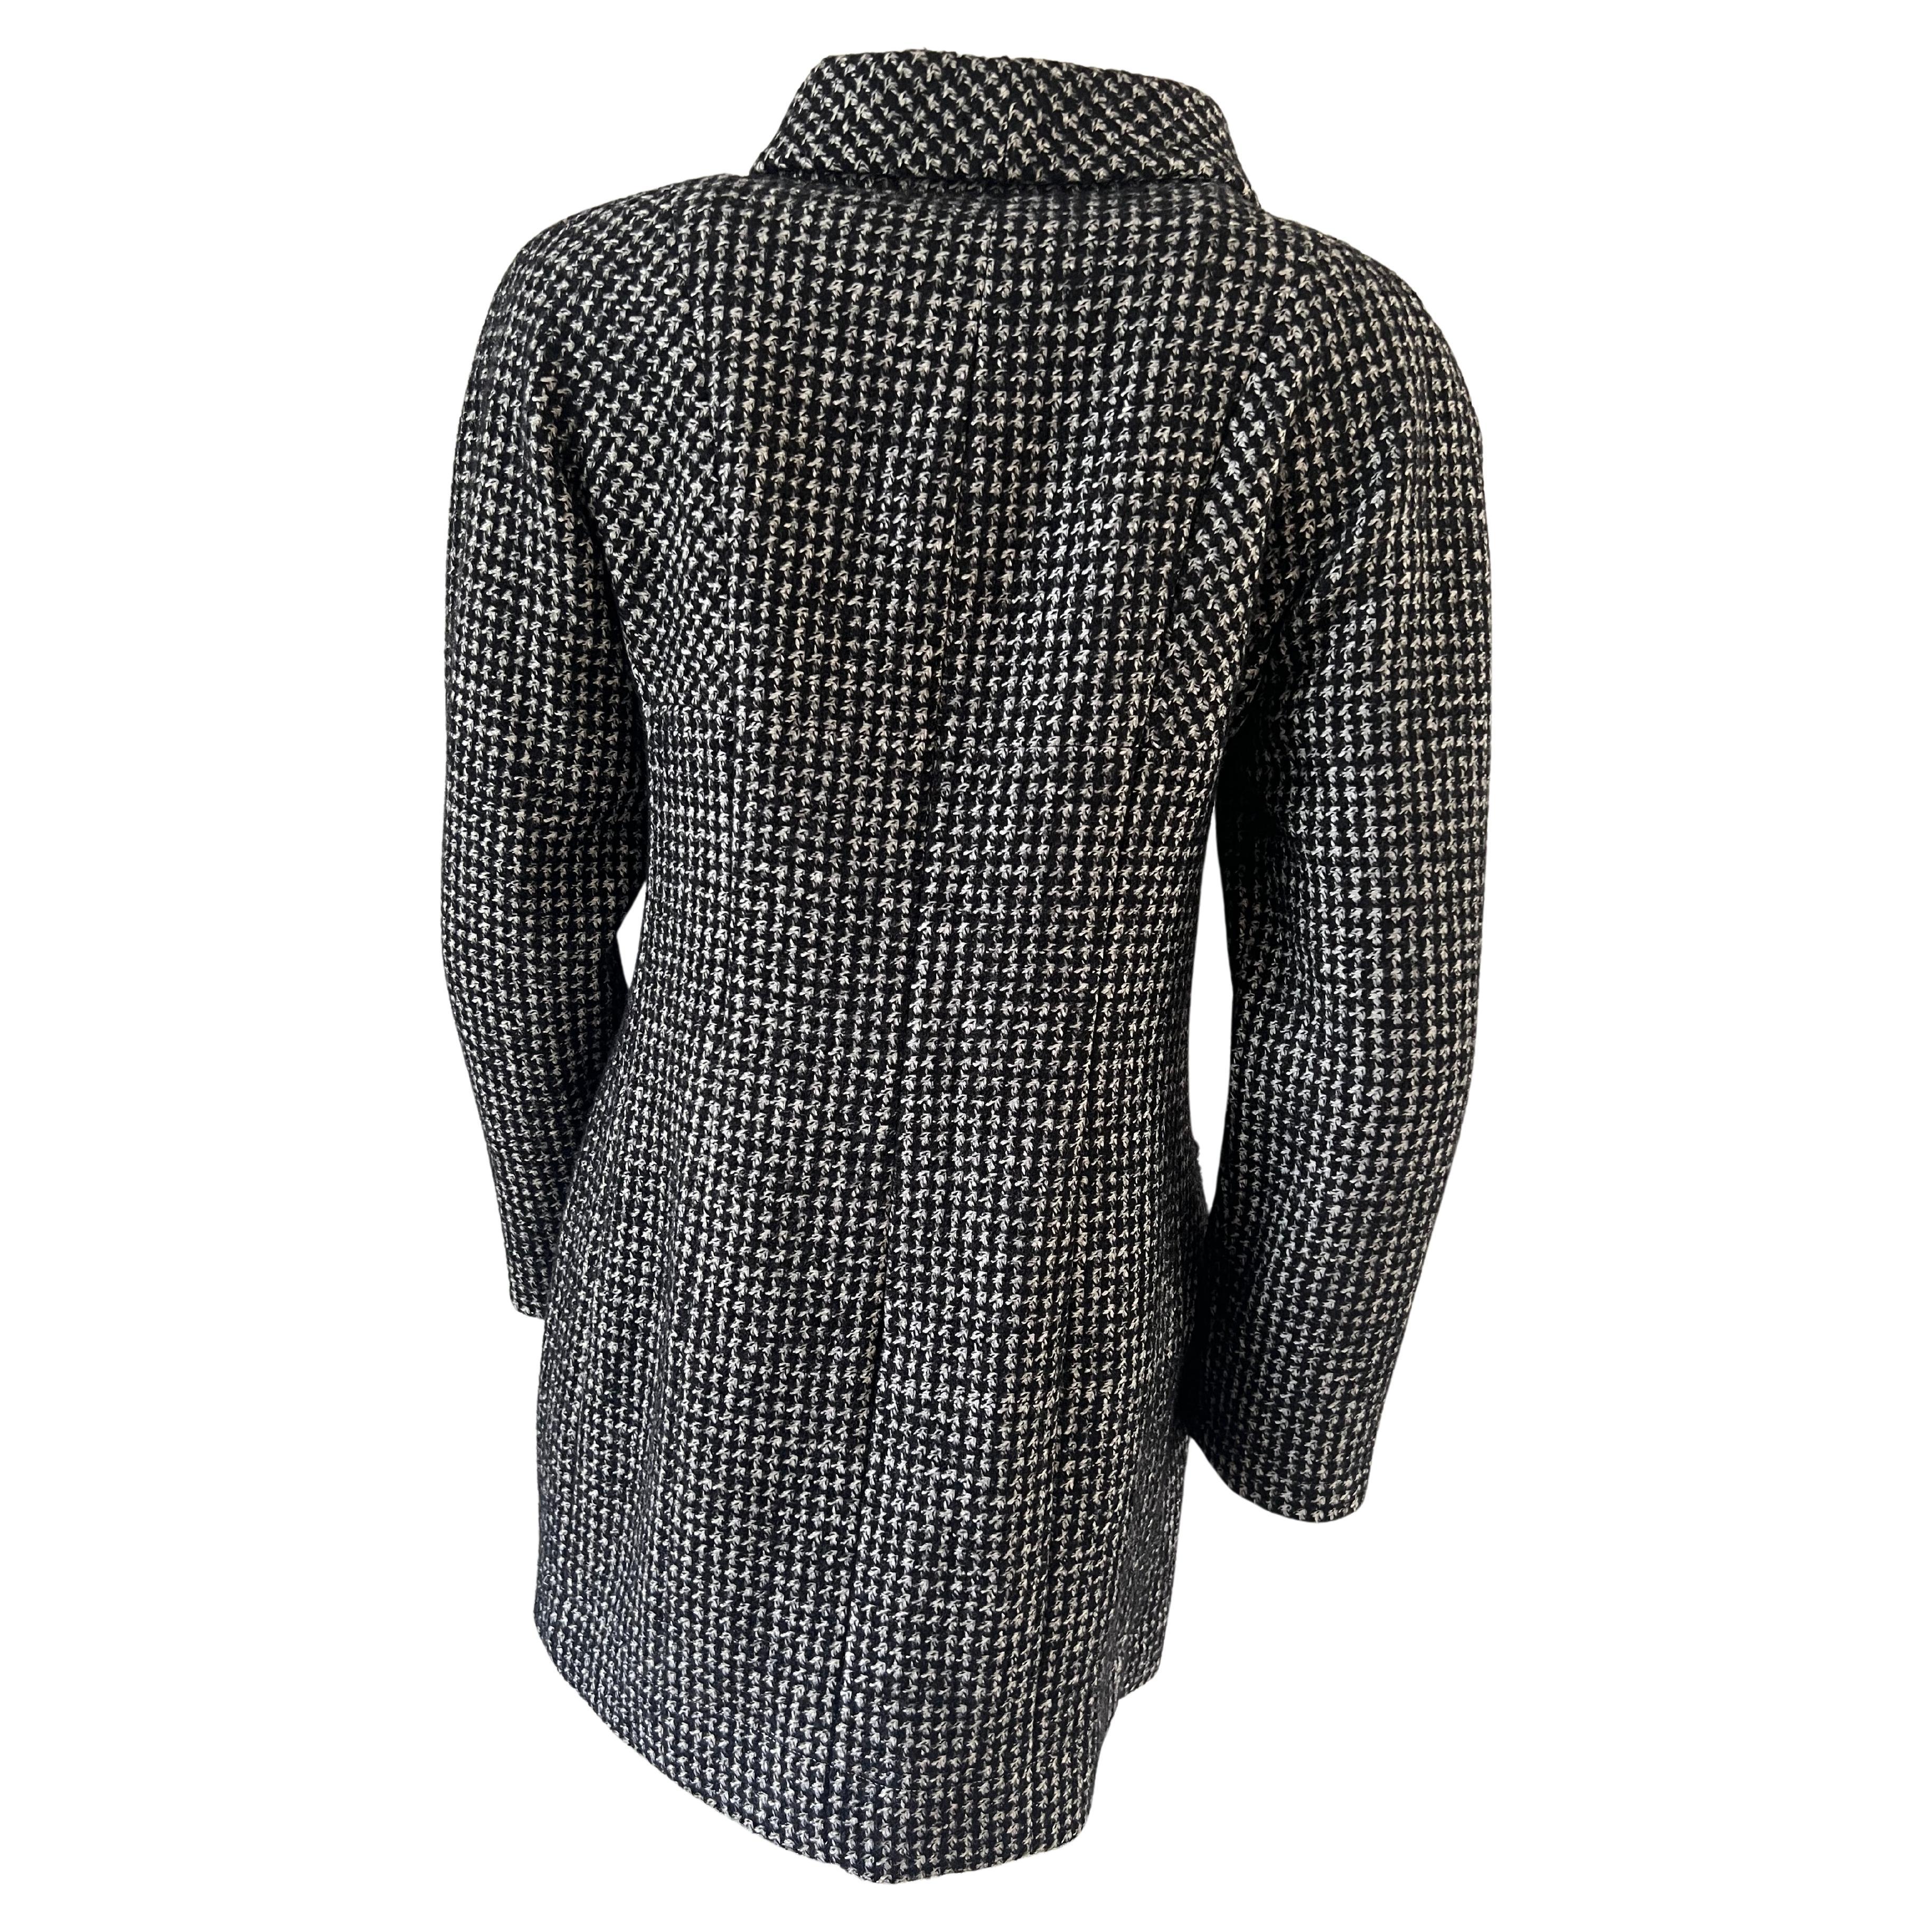 Black and white tweed Chanel Jacket 2014 In Good Condition For Sale In Palm Beach, FL